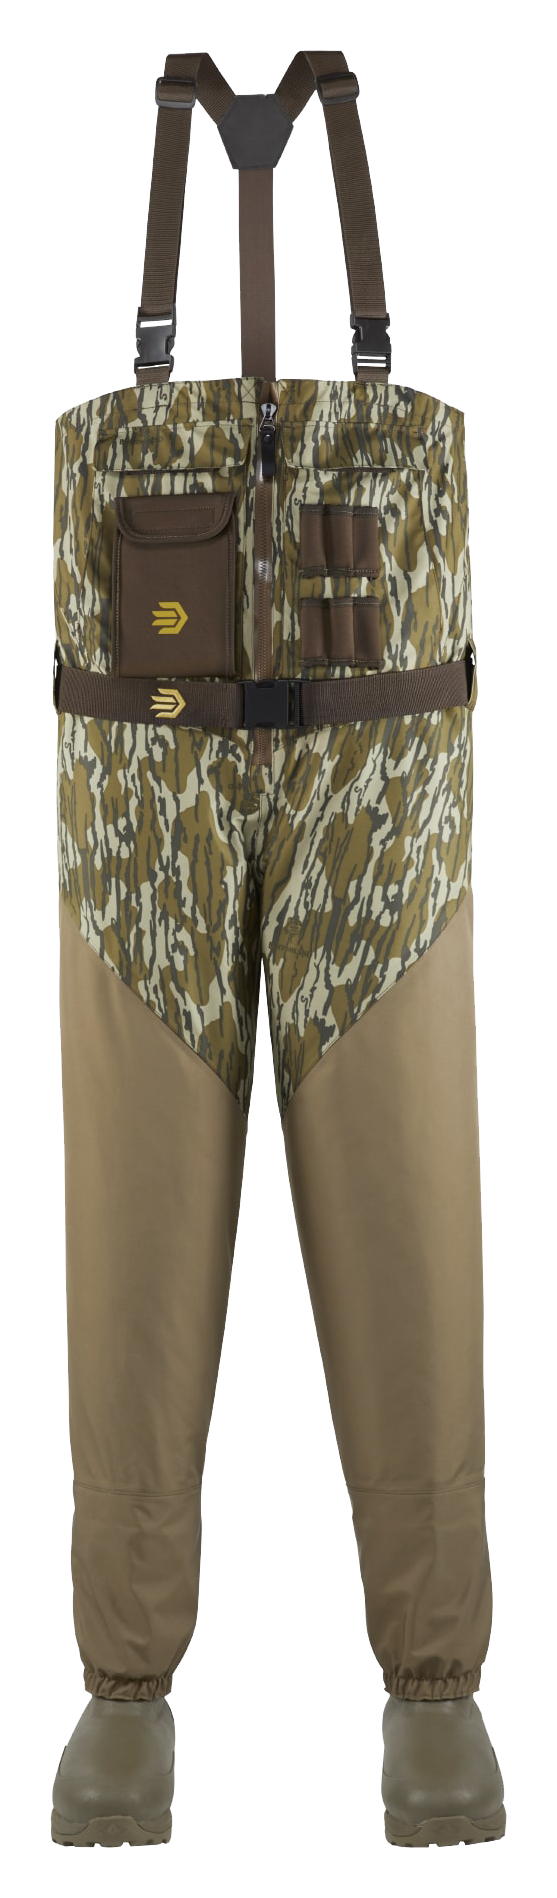 LaCrosse Alpha Agility Select Insulated Front-Zip Breathable Hunting Waders for Men - Mossy Oak Original Bottomland - 8/Stout